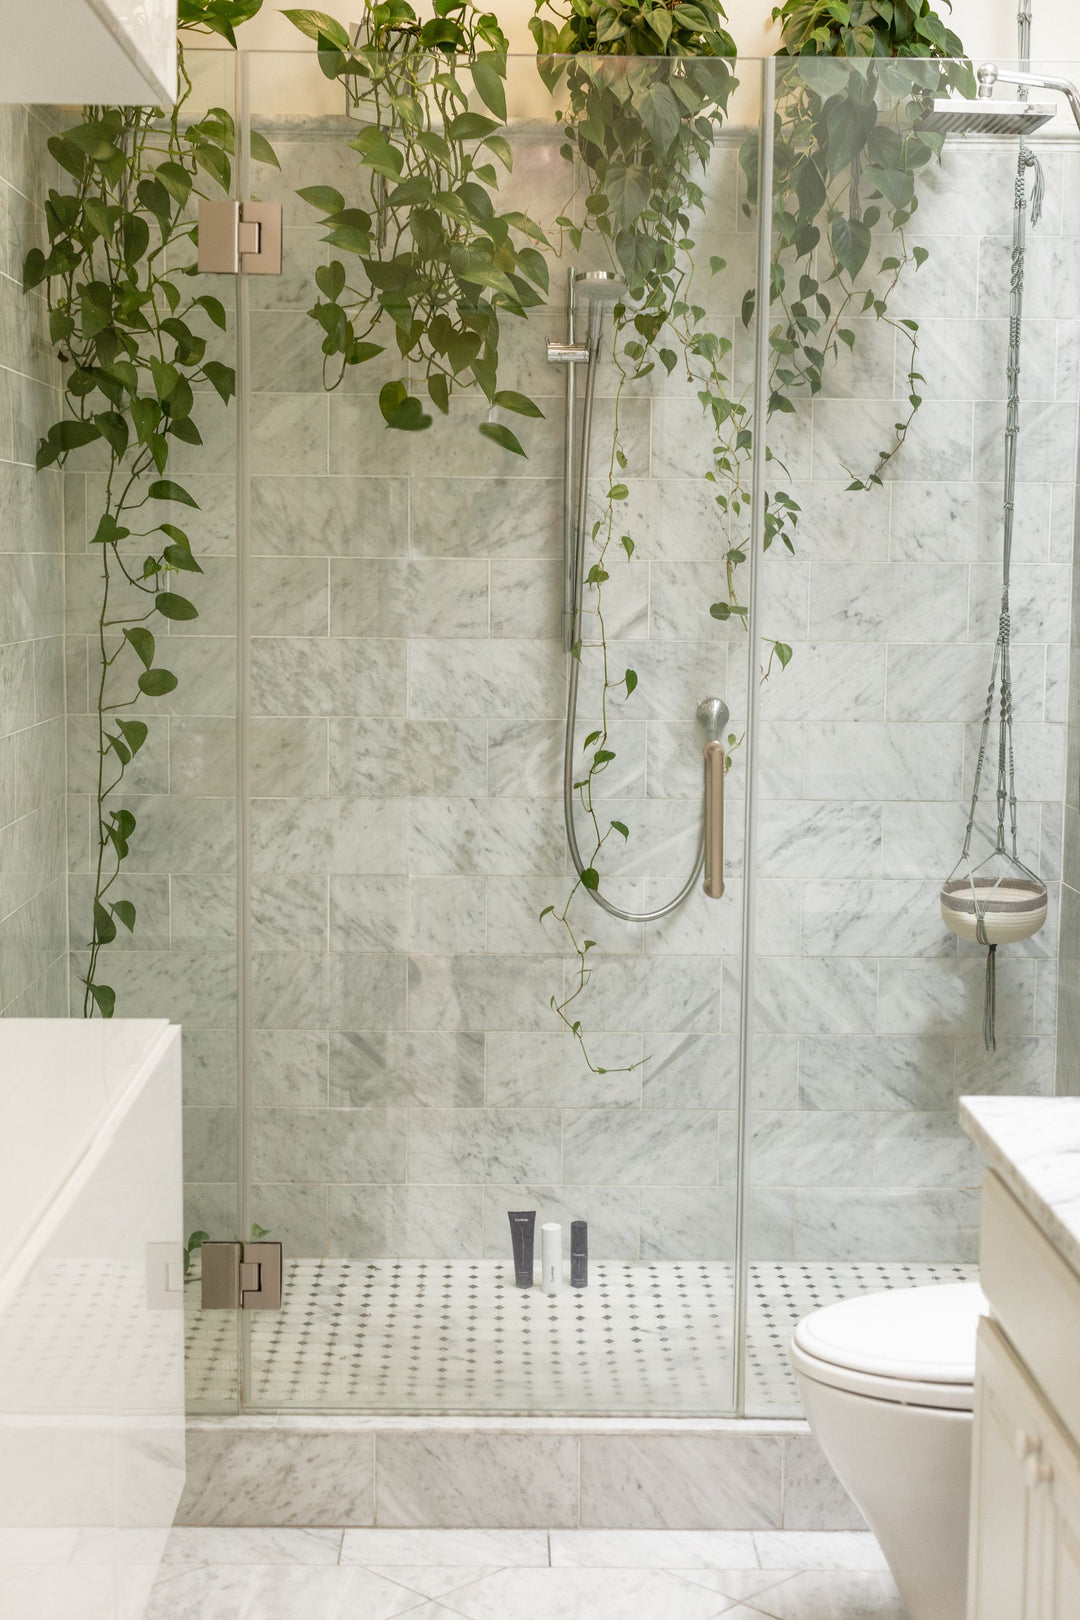 Reimagining Showers: Water-Saving Tips for a Refreshing and Eco-Friendly Cleanse